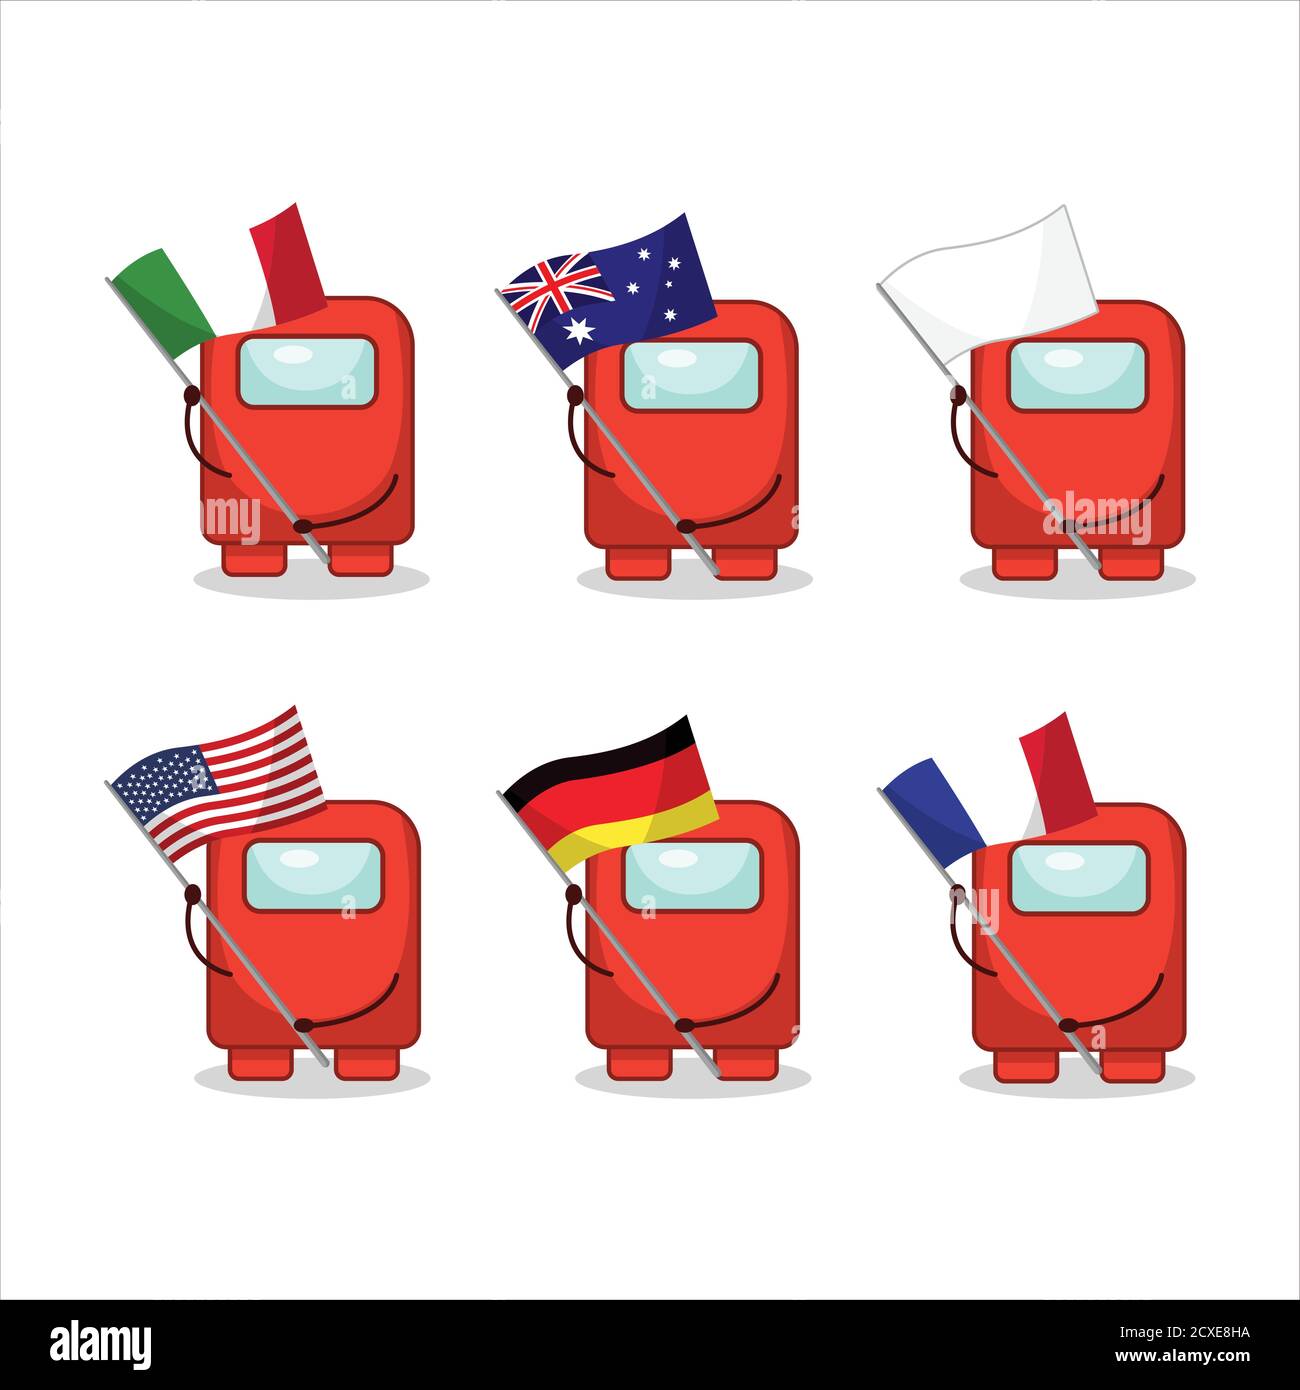 Among us red cartoon character bring the flags of various countries Stock Vector